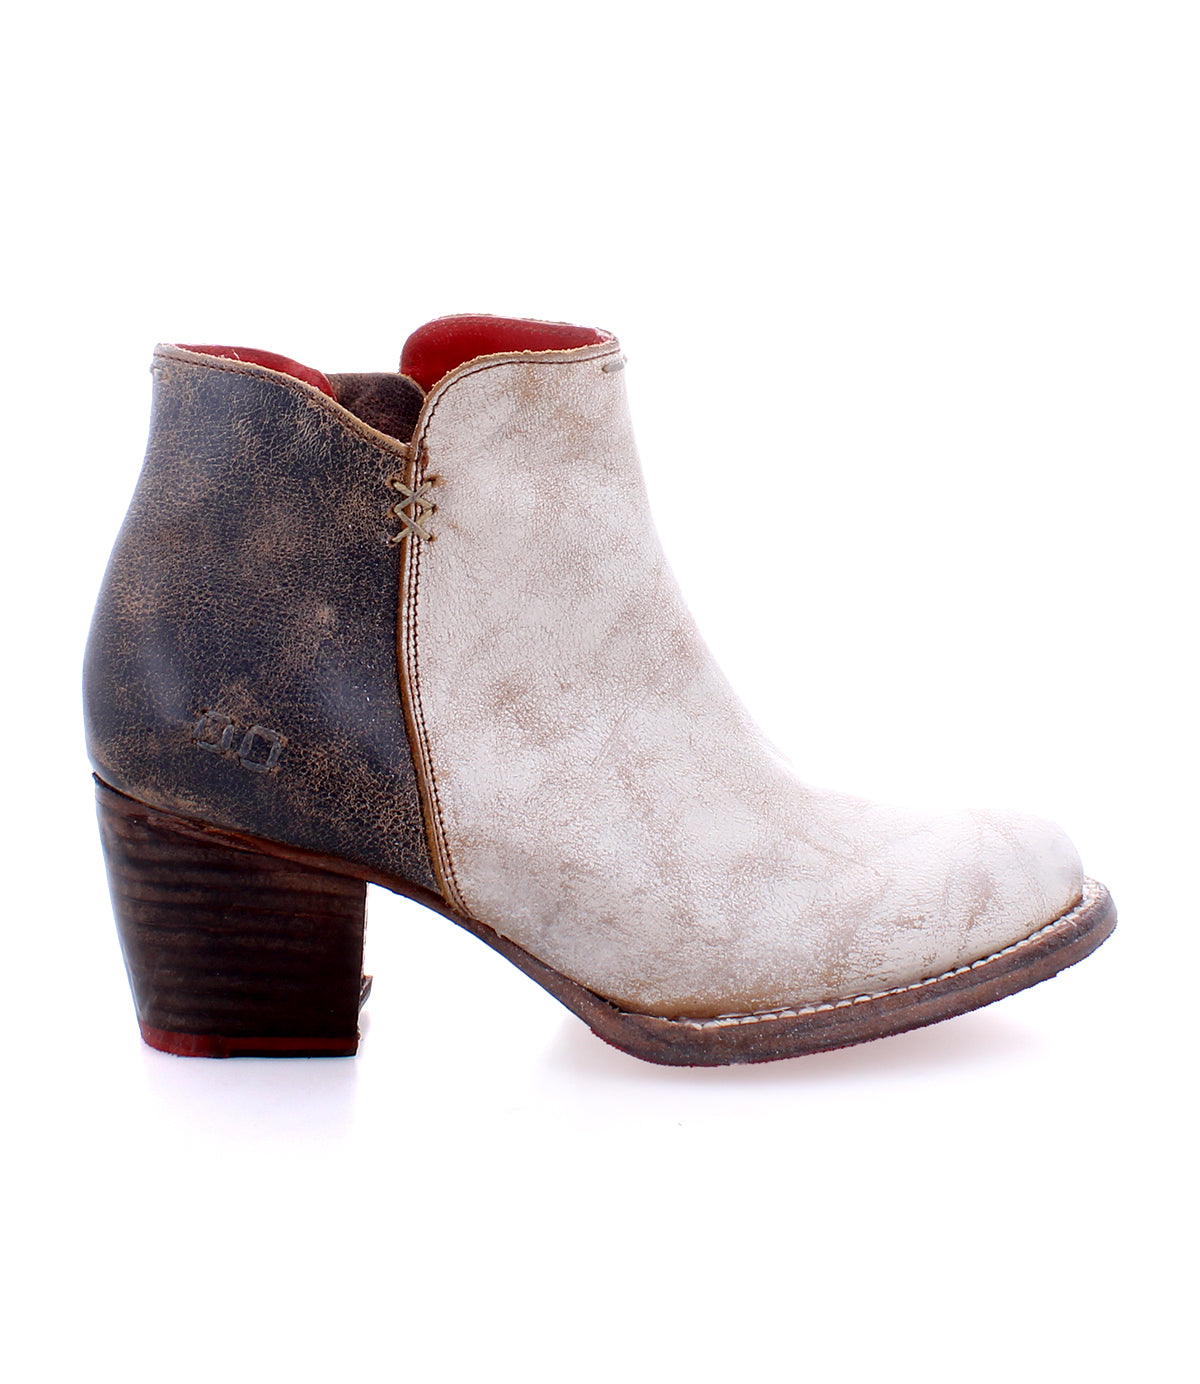 A women's leather ankle boot with a red heel that showcases fine craftsmanship Bed Stu Yell.